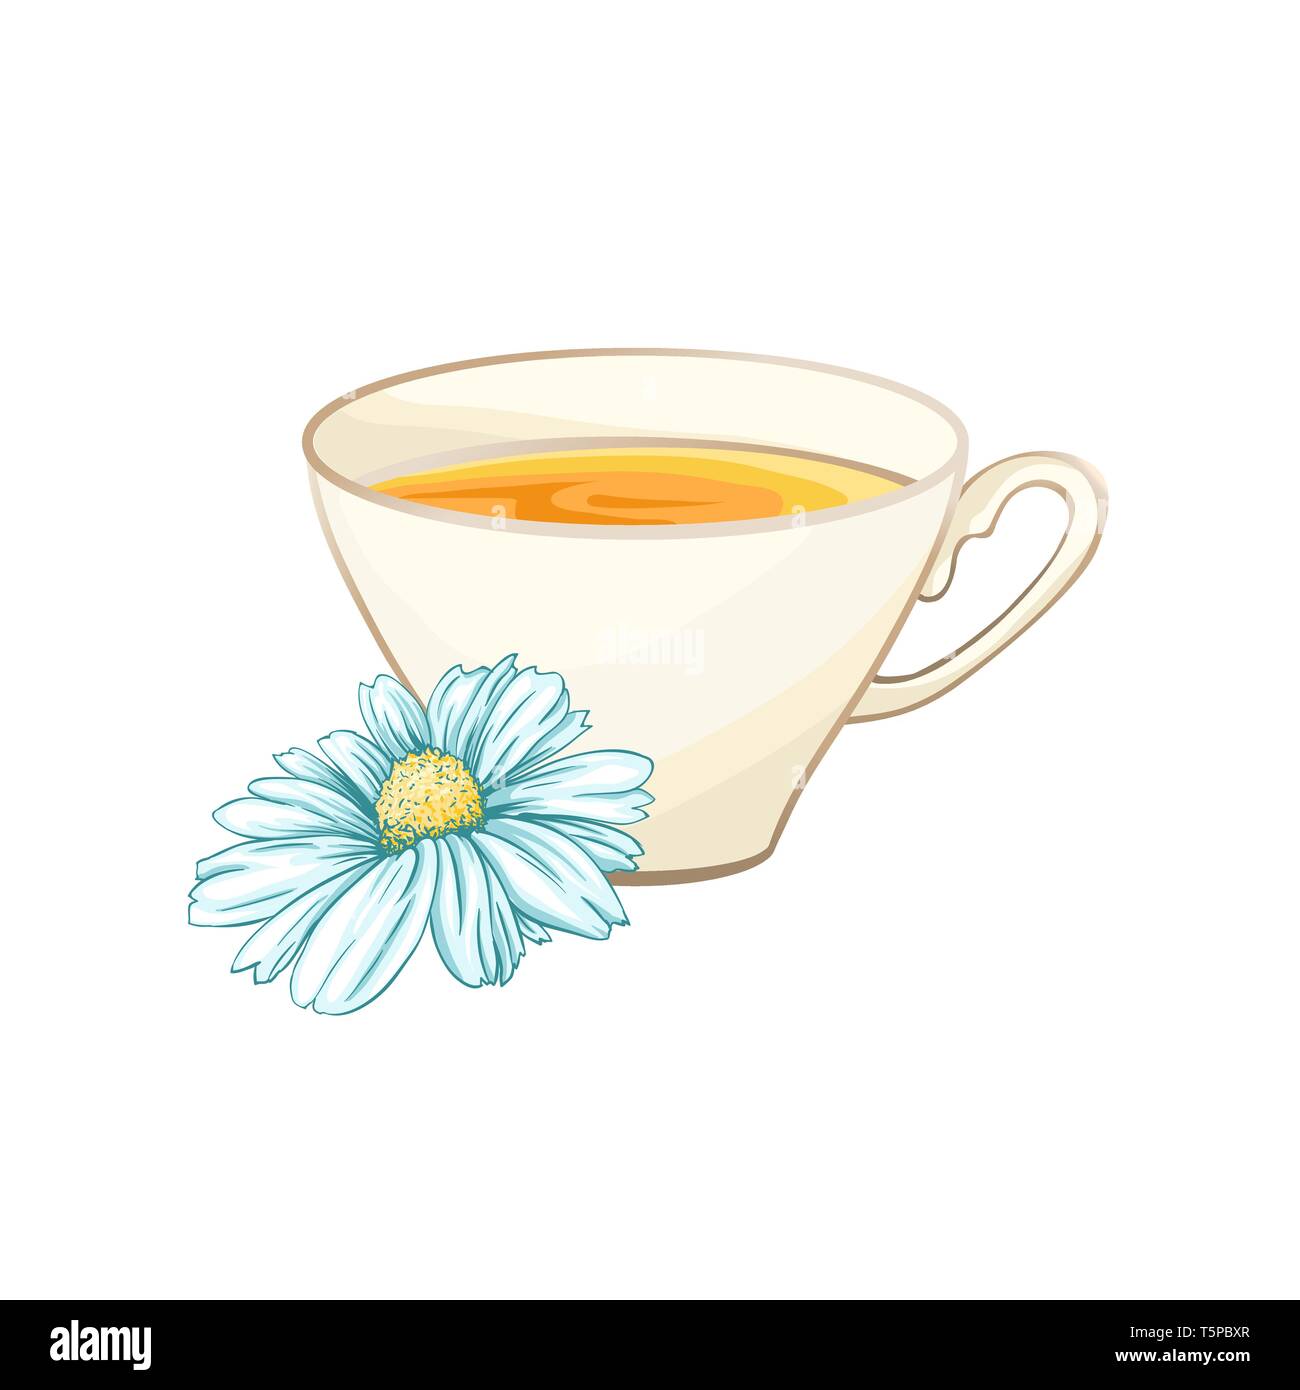 Porcelain or Ceramic Tea Cup. Chamomile or Daisy Flower and Green Tea. Herbal Therapy. Made Tea with Matricaria Loose Herbs. Vector Illustration. Banner Design, Restaurant Menu, English Breakfast. Stock Vector